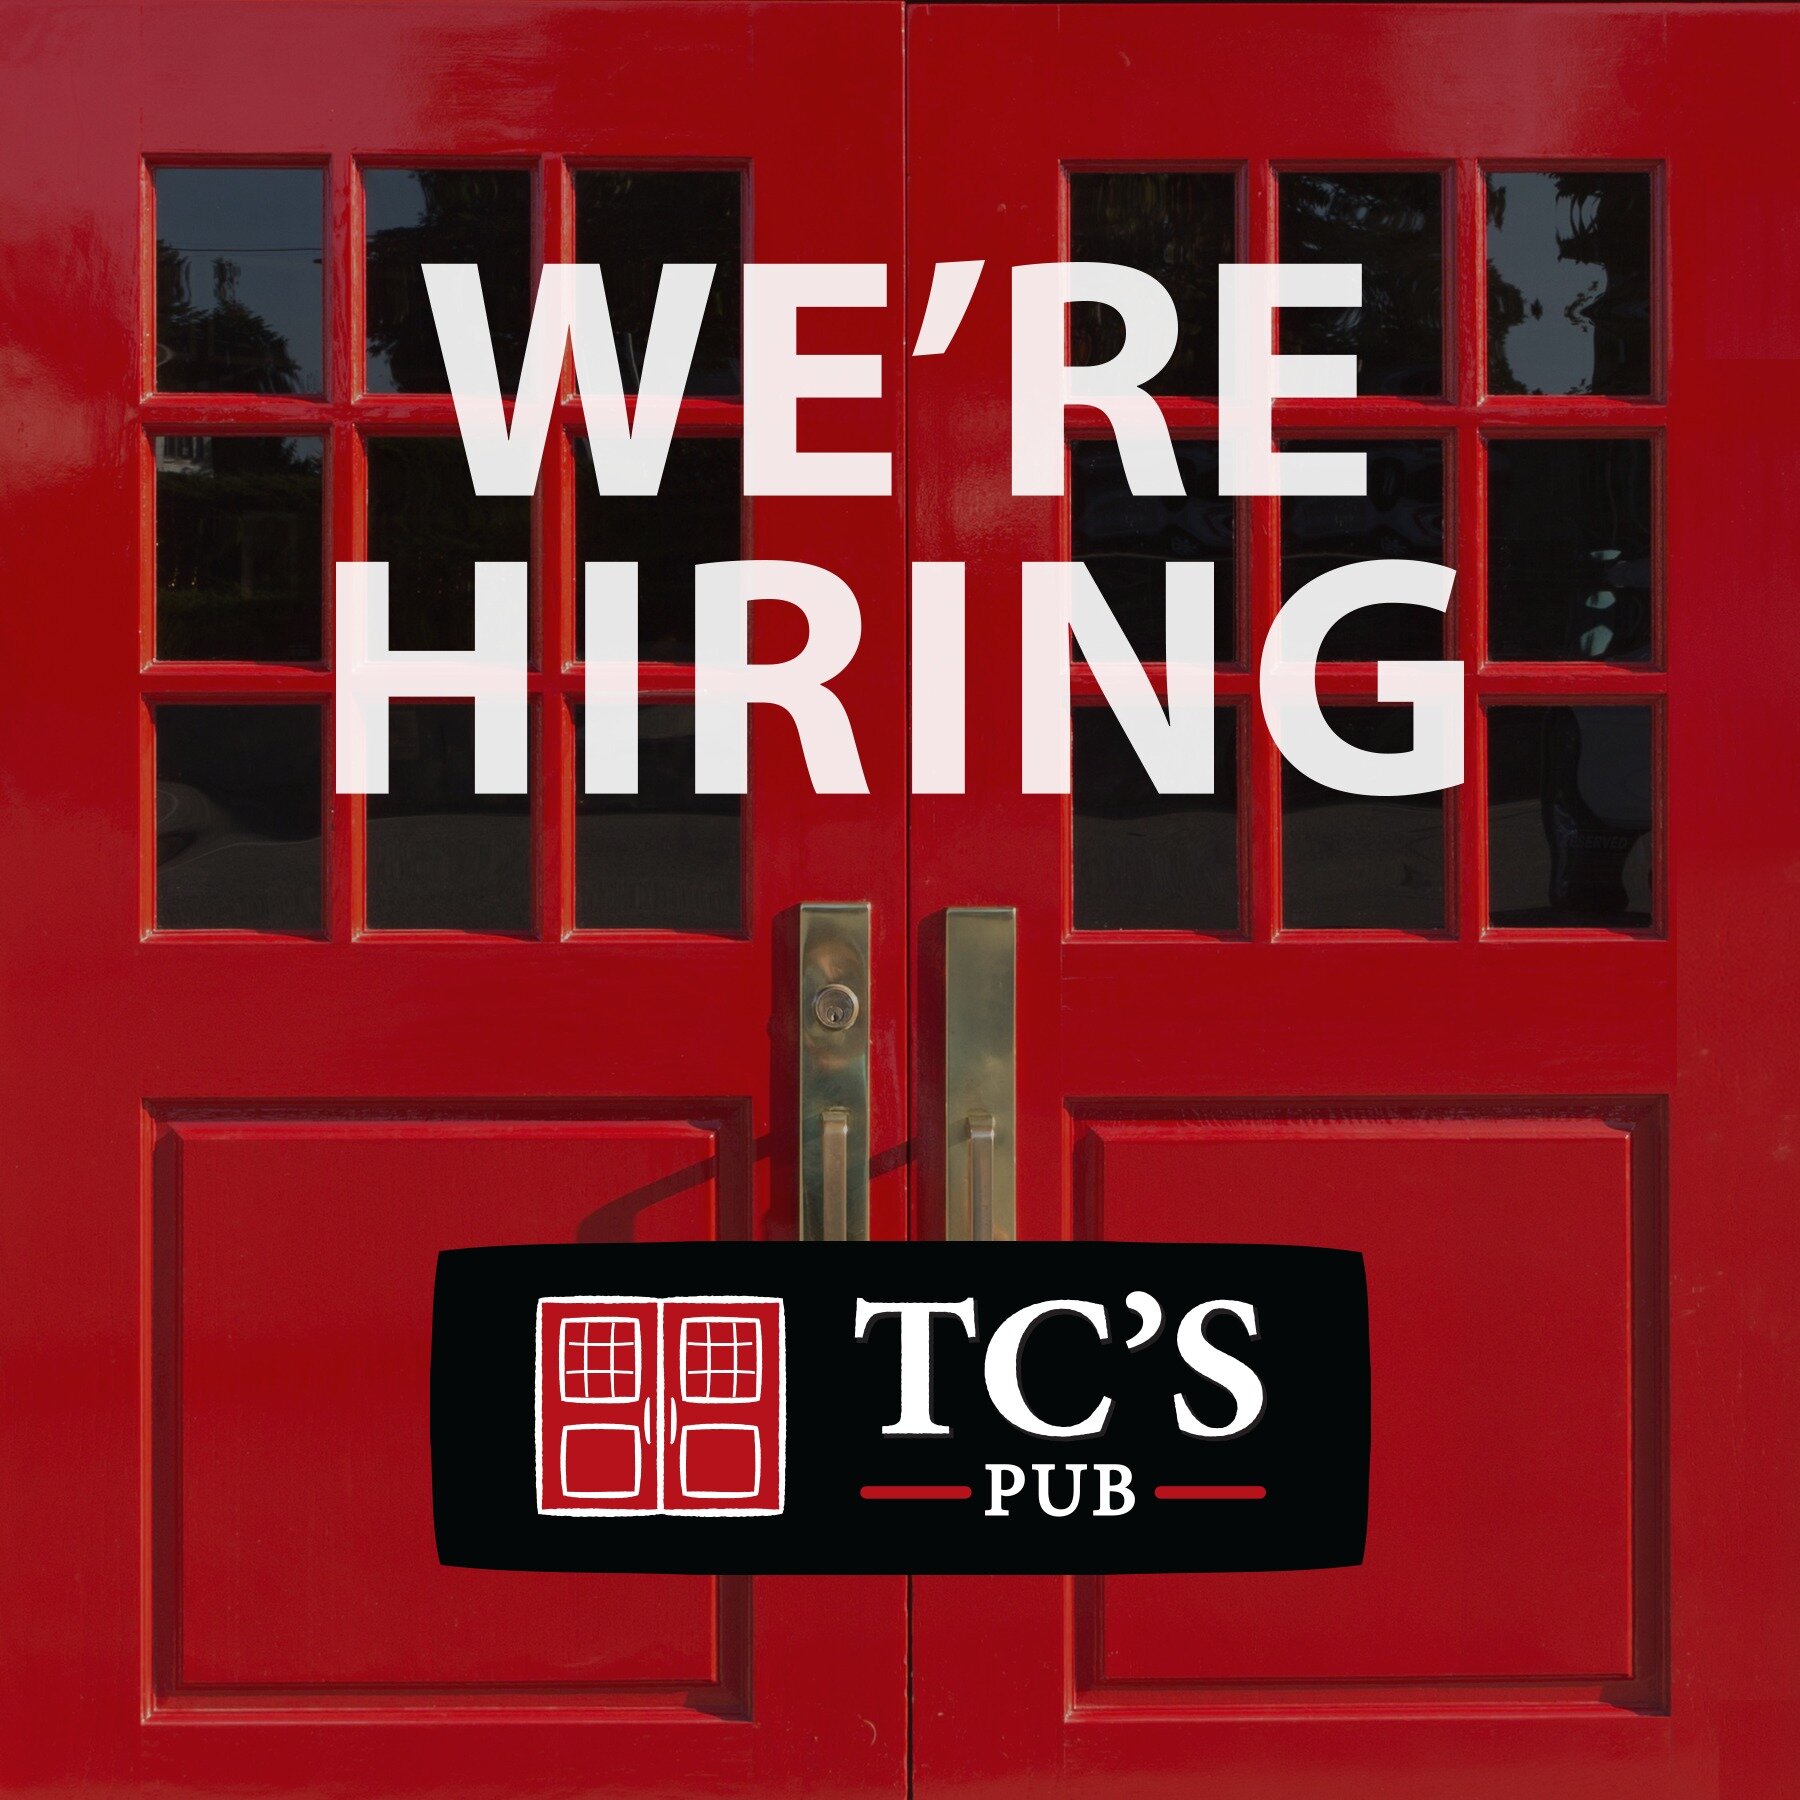 TC's Pub is hiring for a number of positions! We're looking a NEW dishwasher, line cook and servers.

For more info on available positions, click the link below to visit our website👇 https://www.tcspub.ca/employment

To apply, please email an update